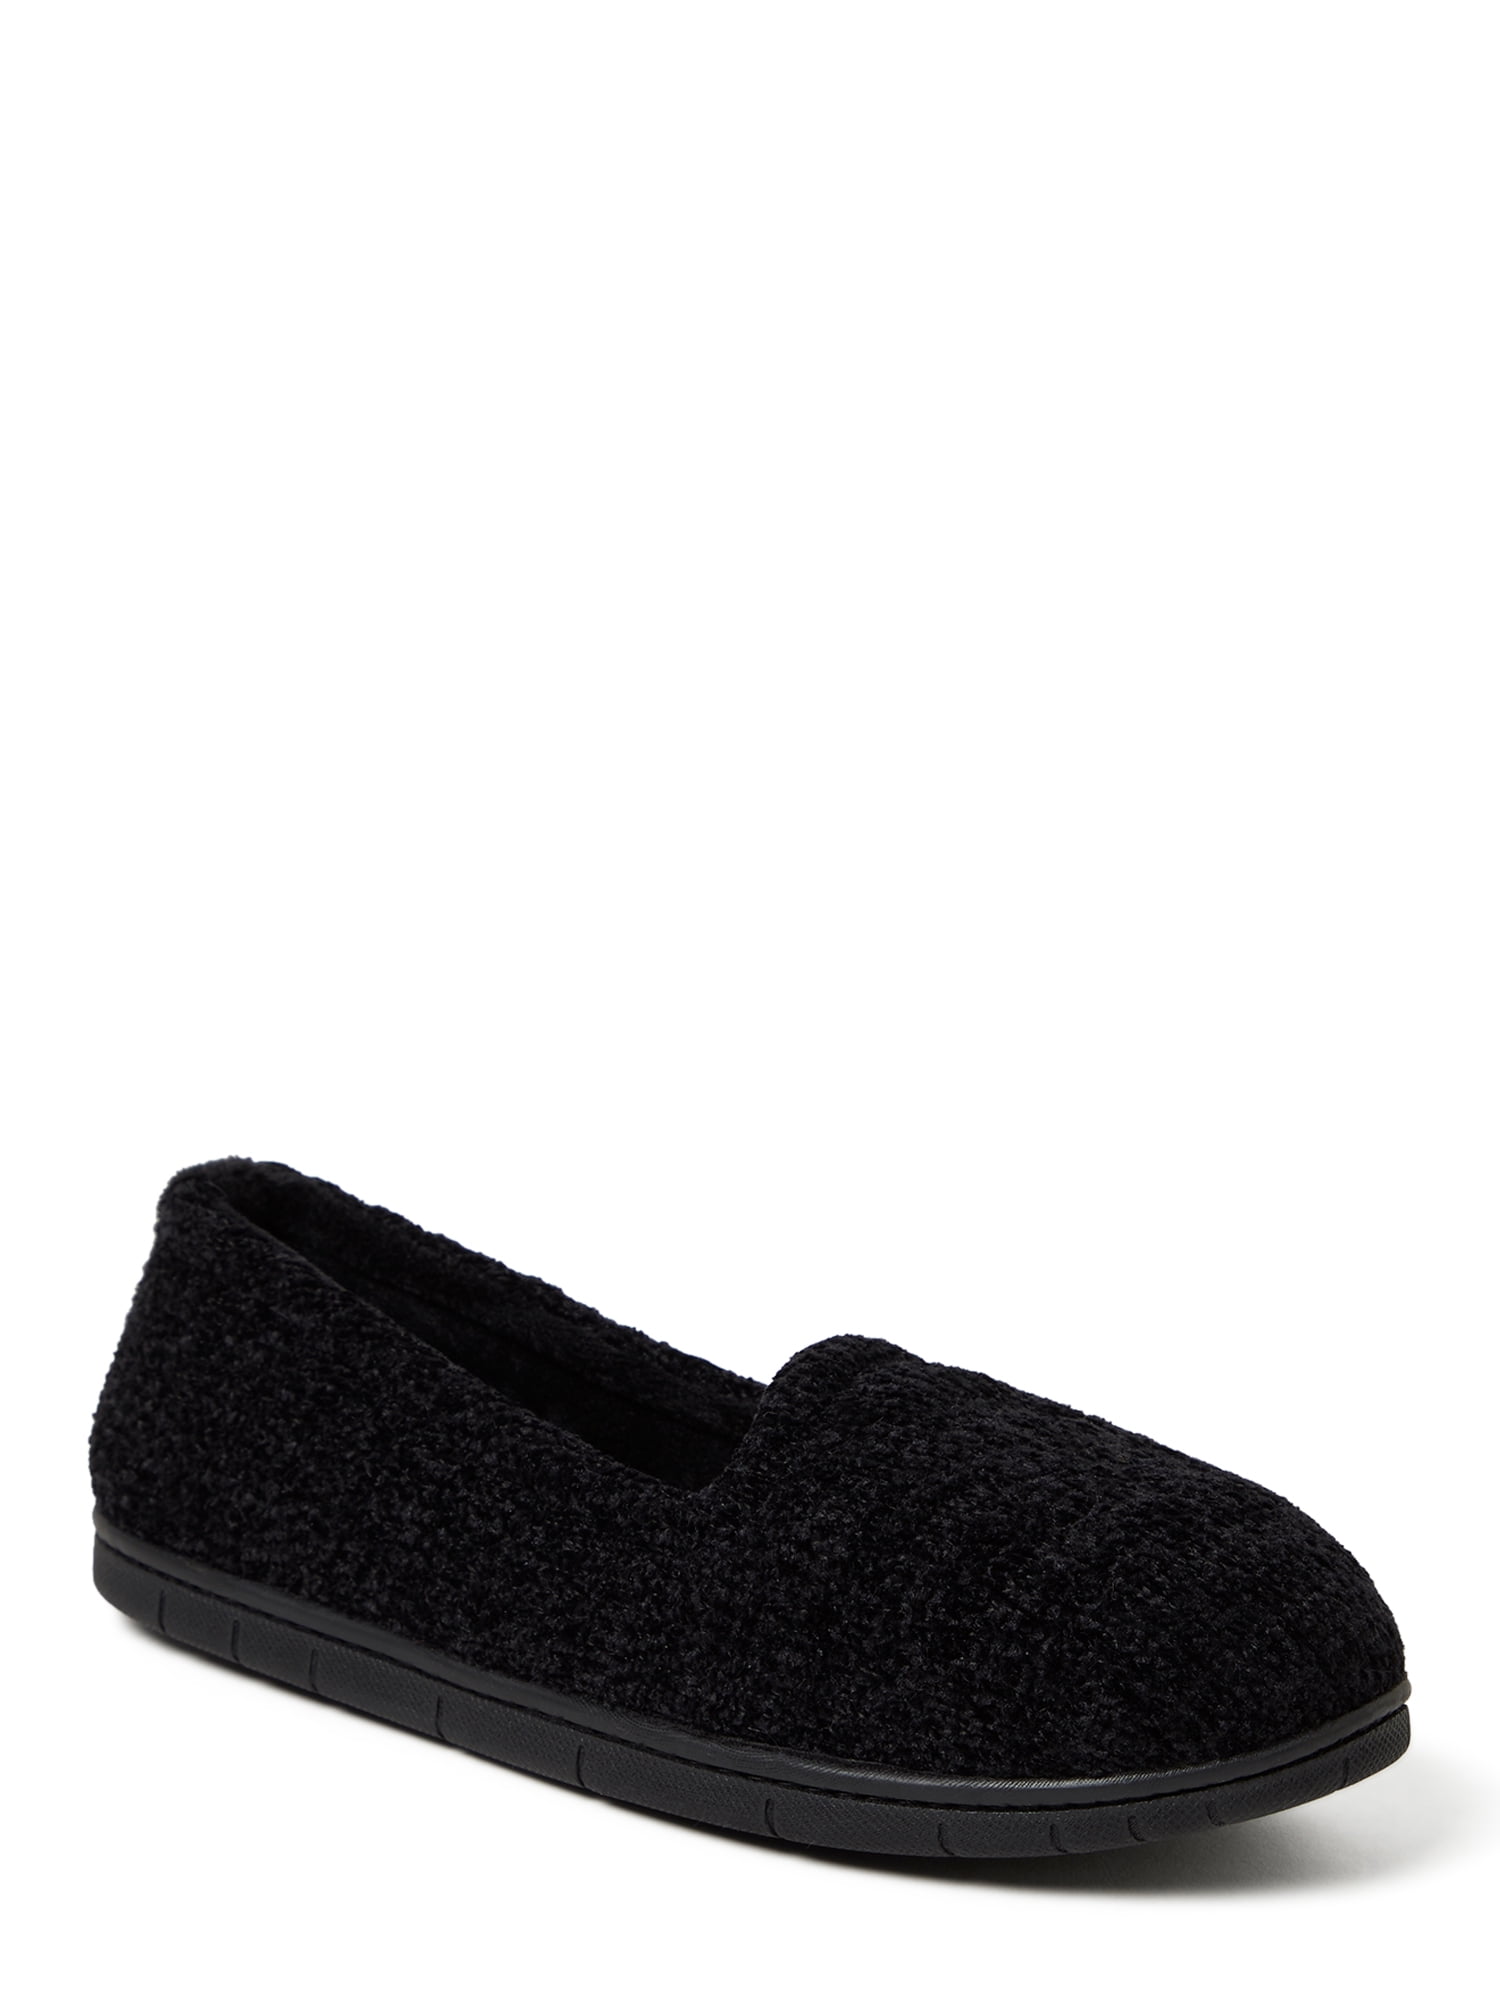 DF by Dearfoams Women’s Chenille Closed Back with Embroidery Slippers ...